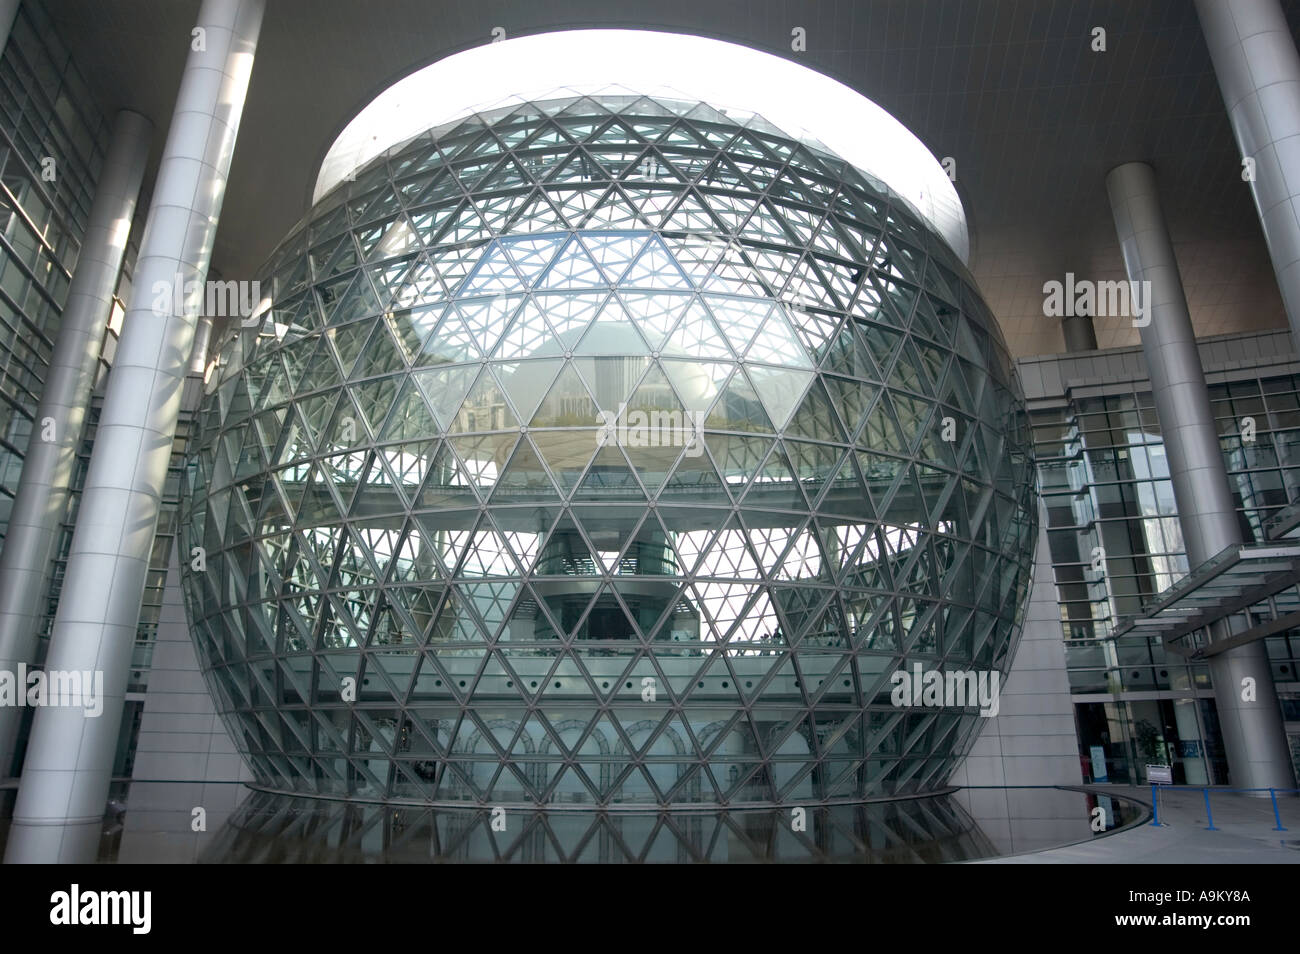 GEODESIC DOME OF THE SCIENCE AND TECHNOLOGY MUSEUM CENTURY SQUARE PUDONG  SHANGHAI CHINA Stock Photo - Alamy